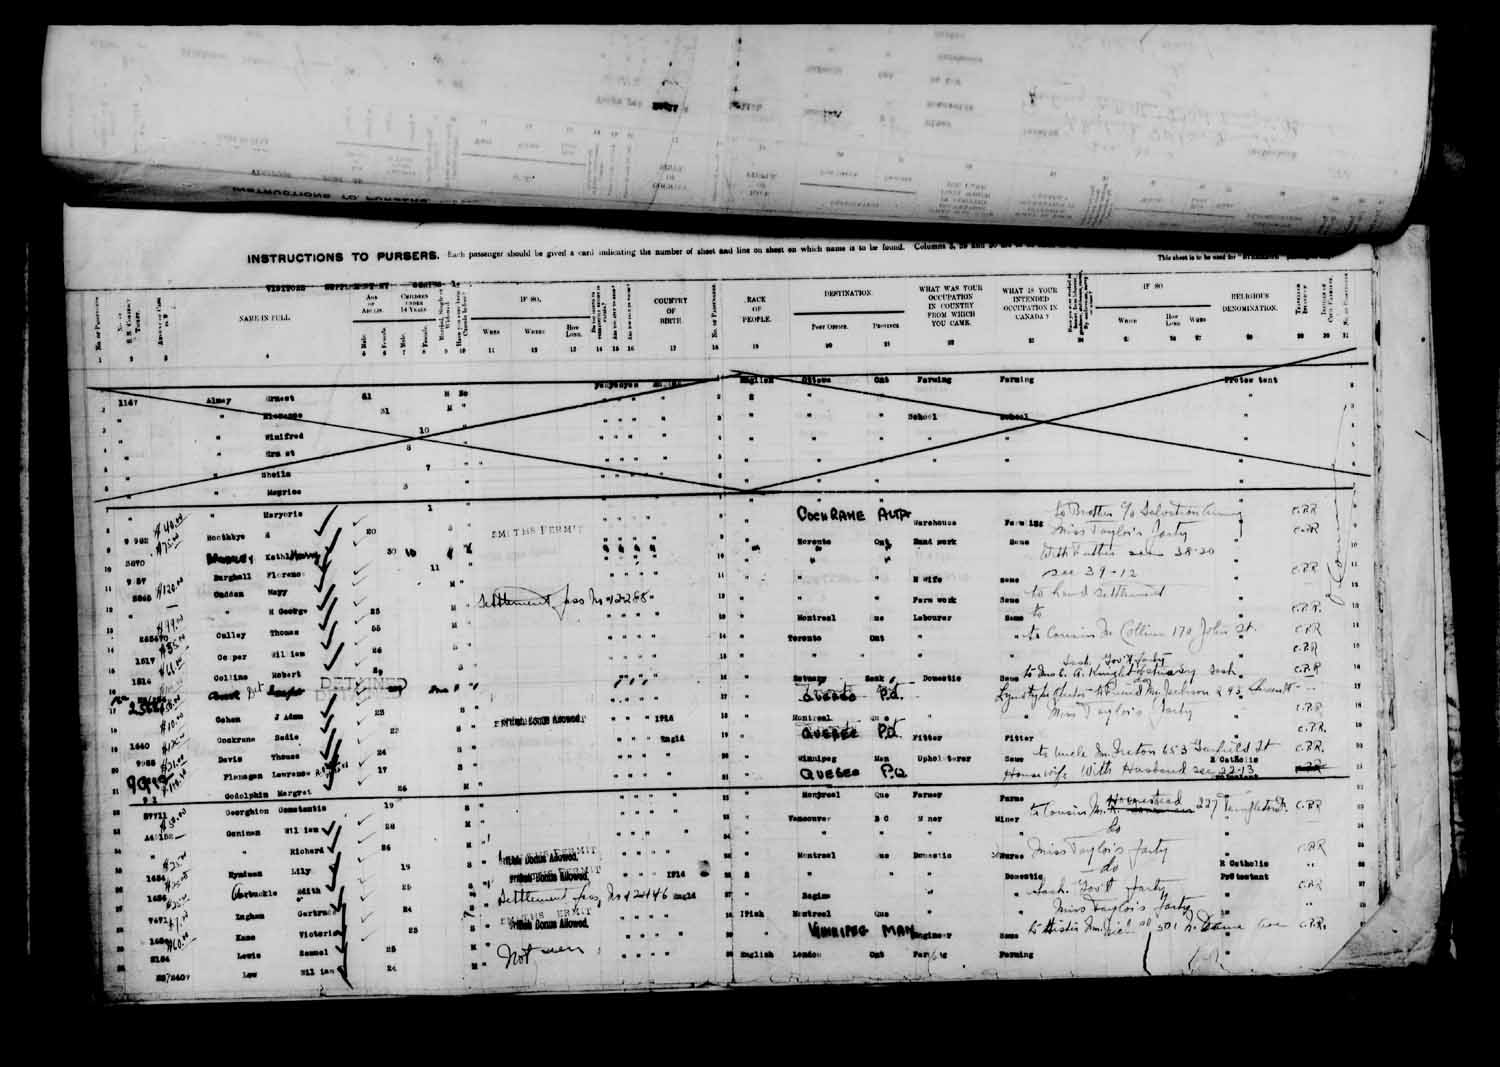 Digitized page of Passenger Lists for Image No.: e003610666